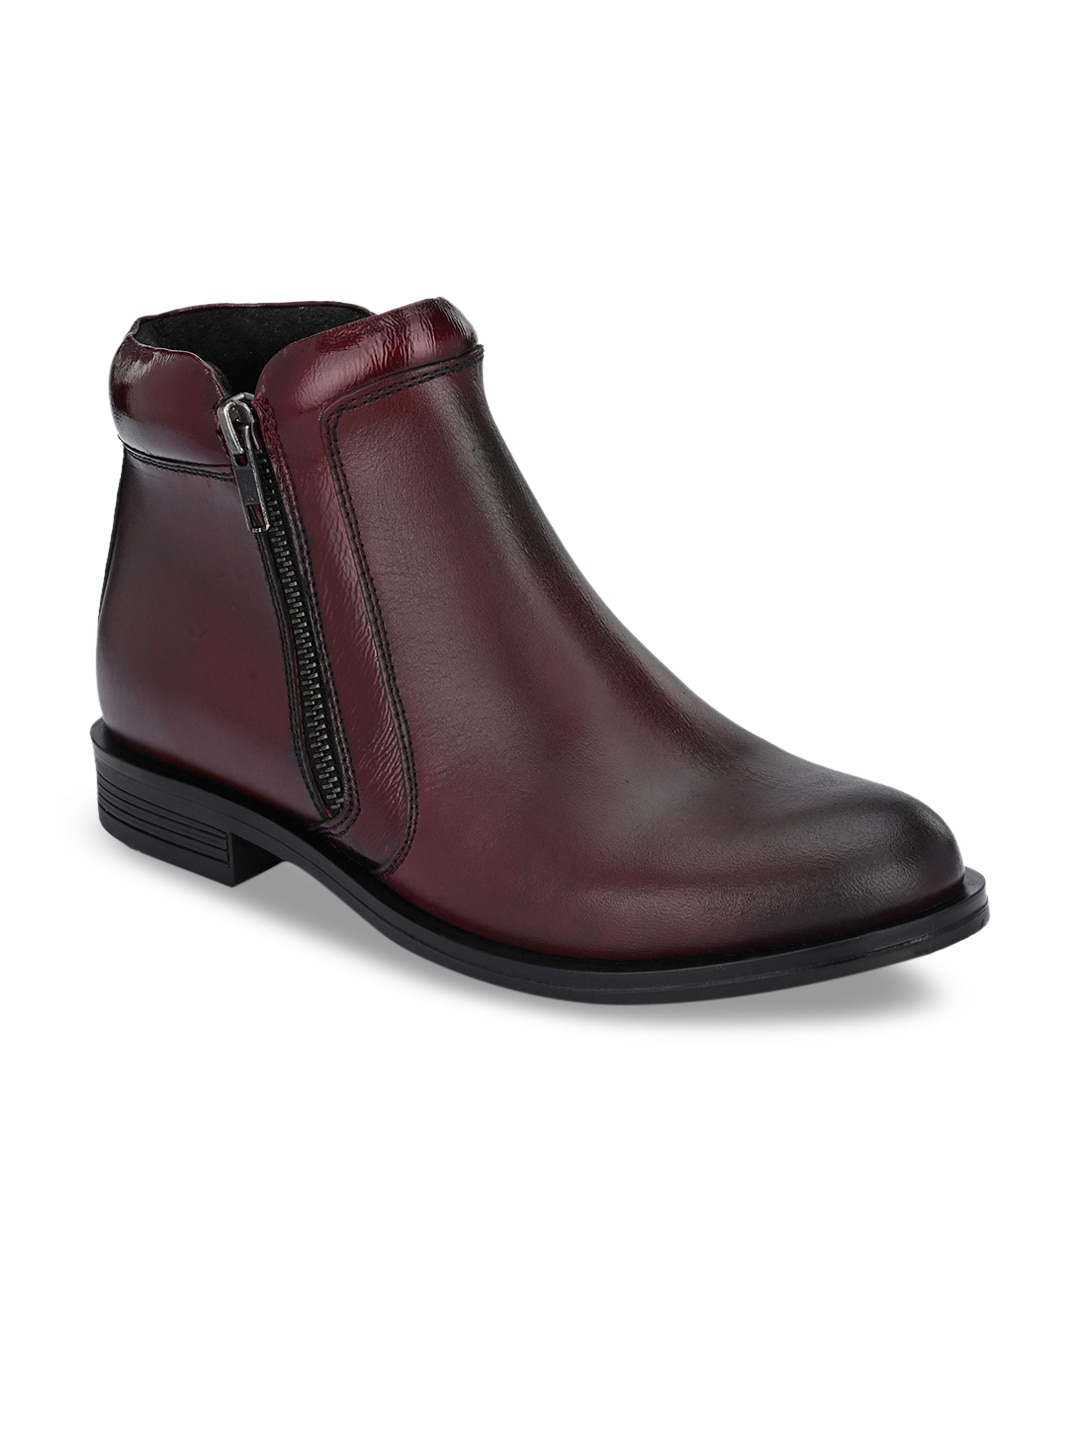 Delize Burgundy Leather Block Heeled Boots Price in India